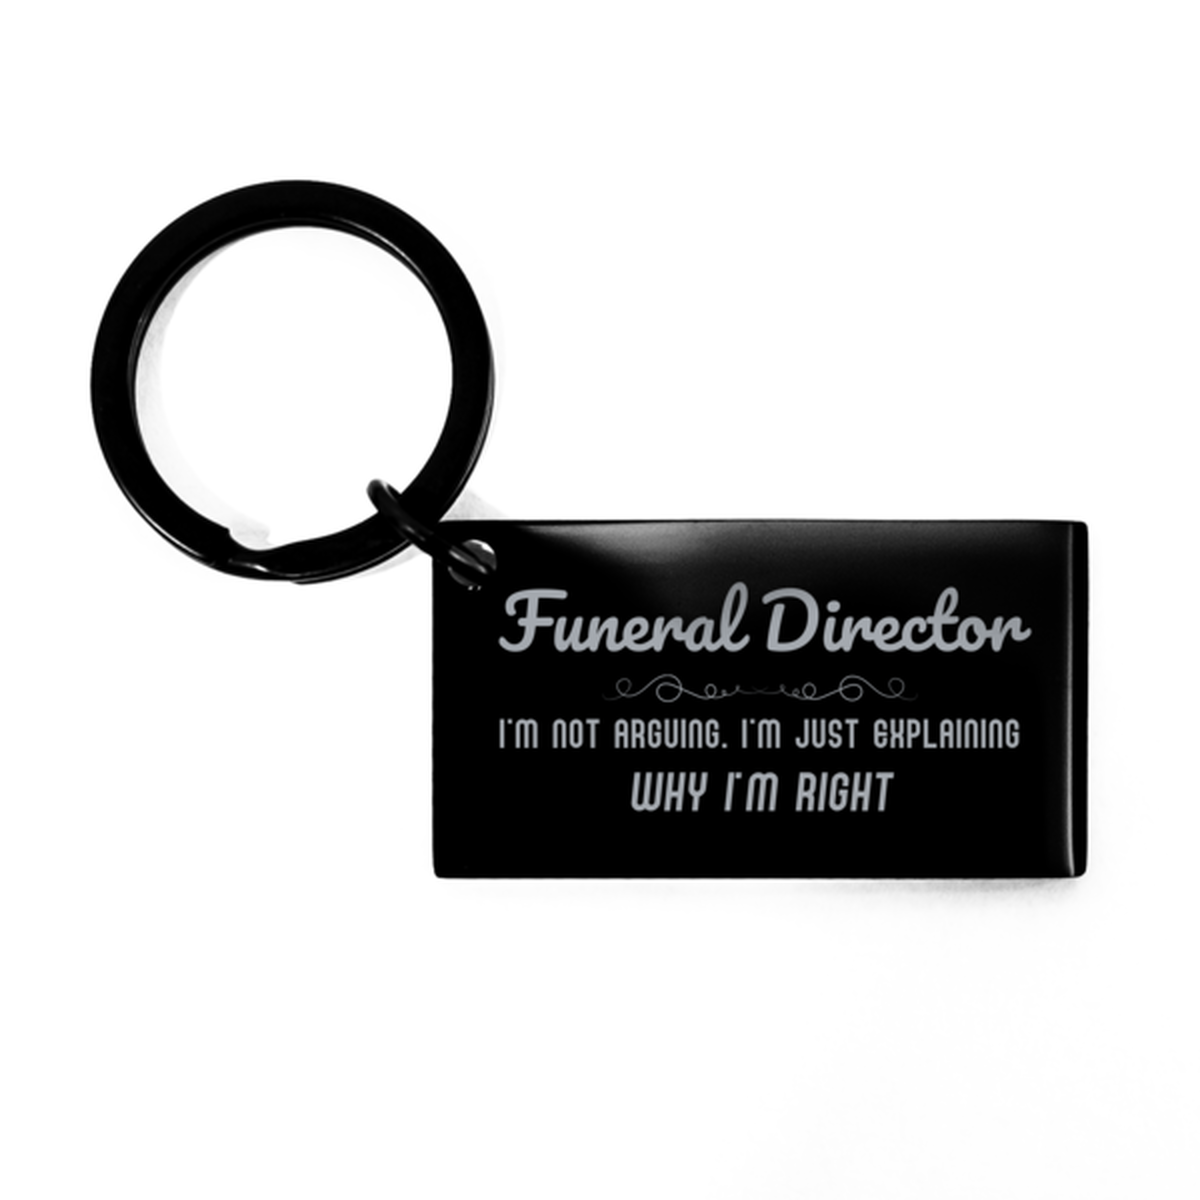 Funeral Director I'm not Arguing. I'm Just Explaining Why I'm RIGHT Keychain, Funny Saying Quote Funeral Director Gifts For Funeral Director Graduation Birthday Christmas Gifts for Men Women Coworker